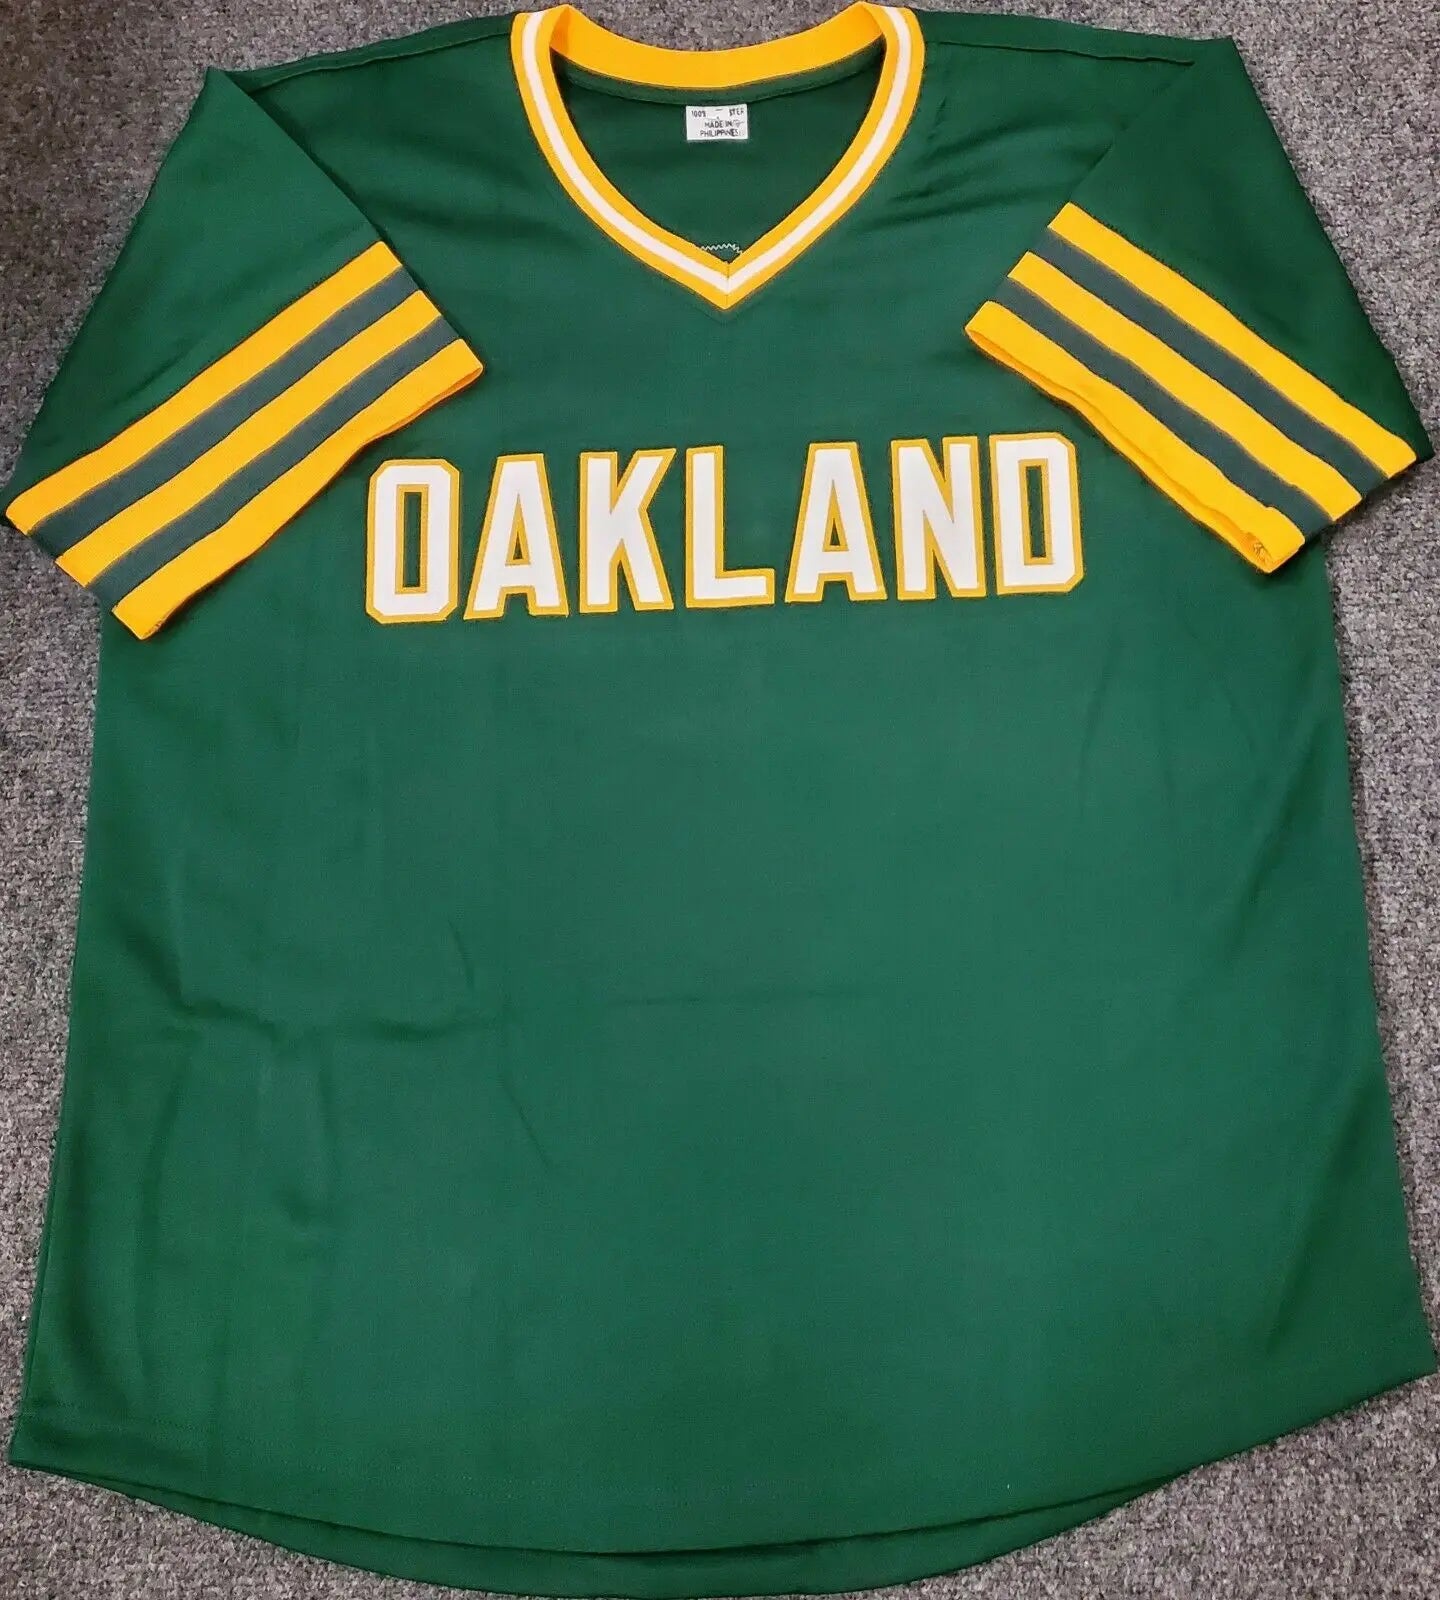 Jose Canseco Autographed Signed Oakland A's Green Throwback